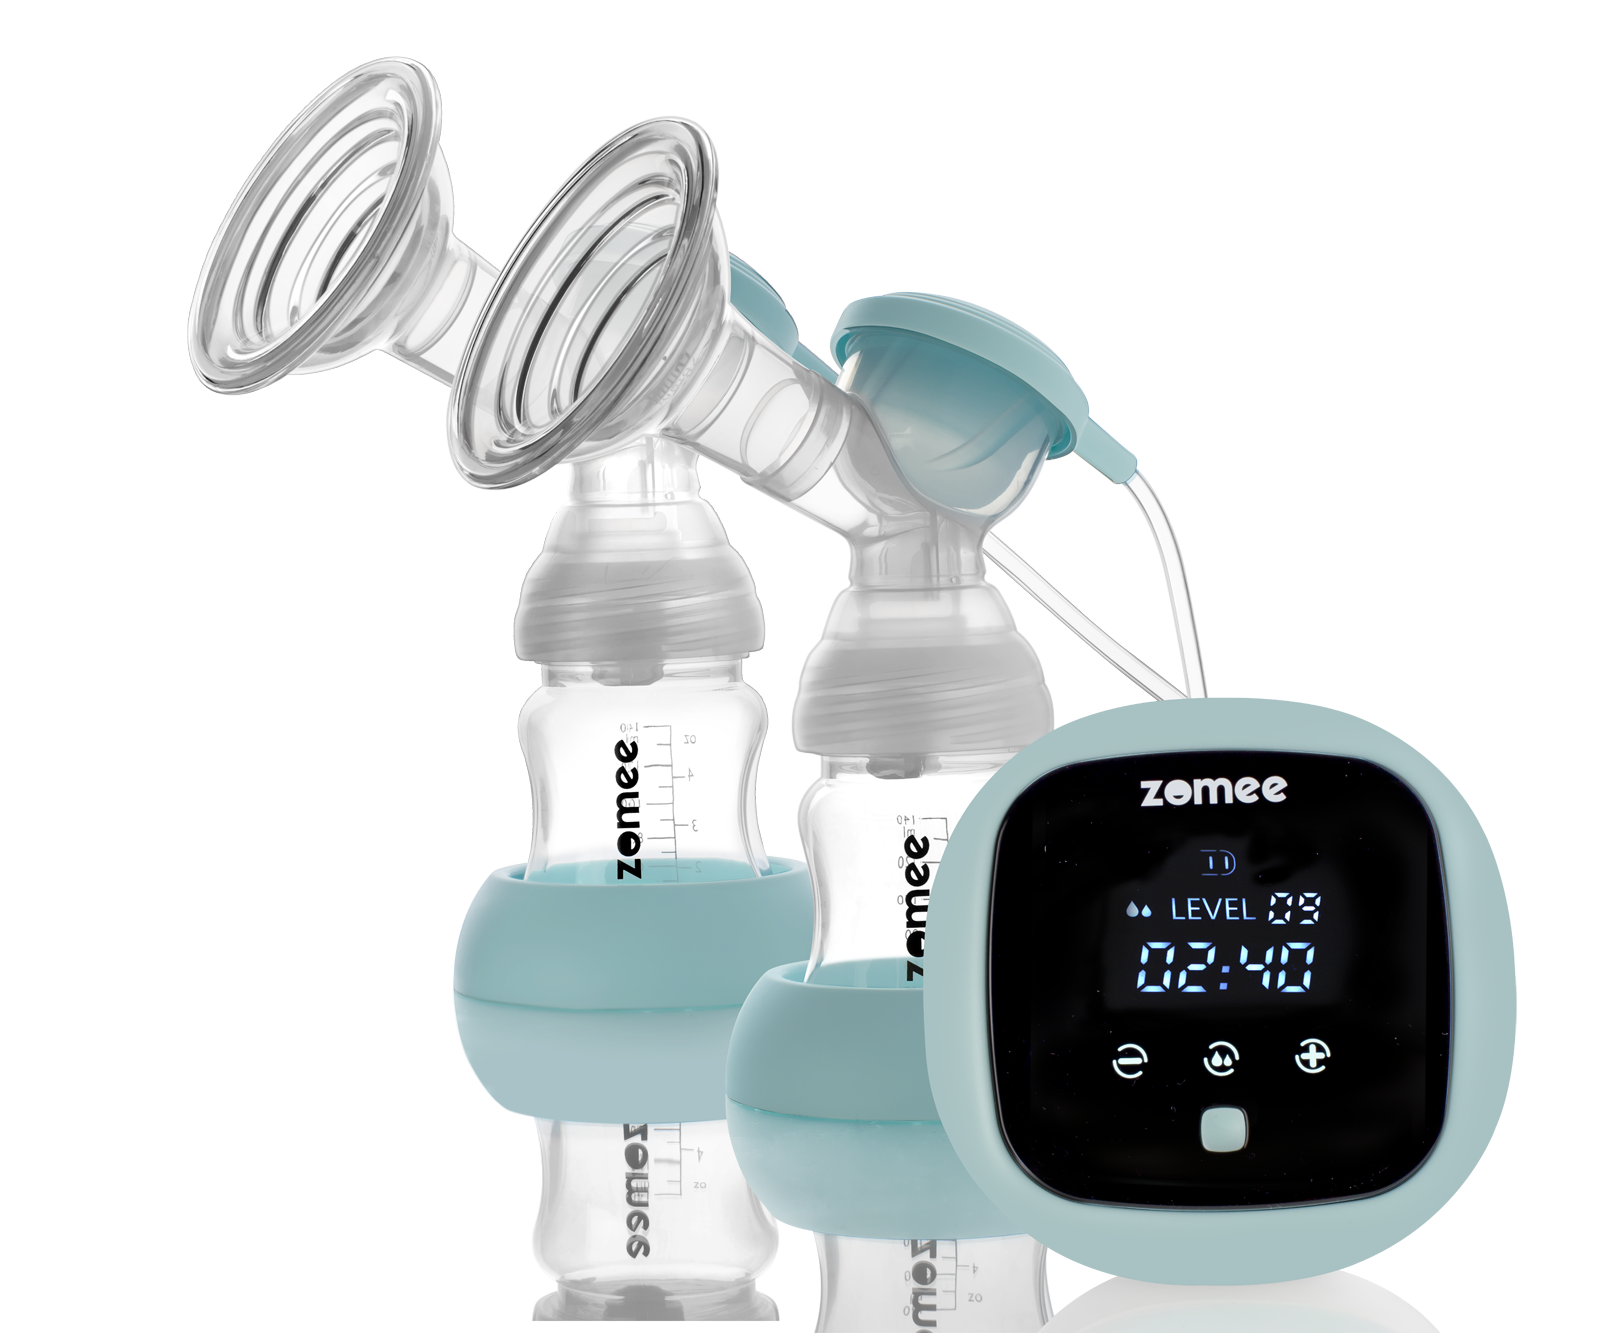 Zomee Z1 pump with bottles